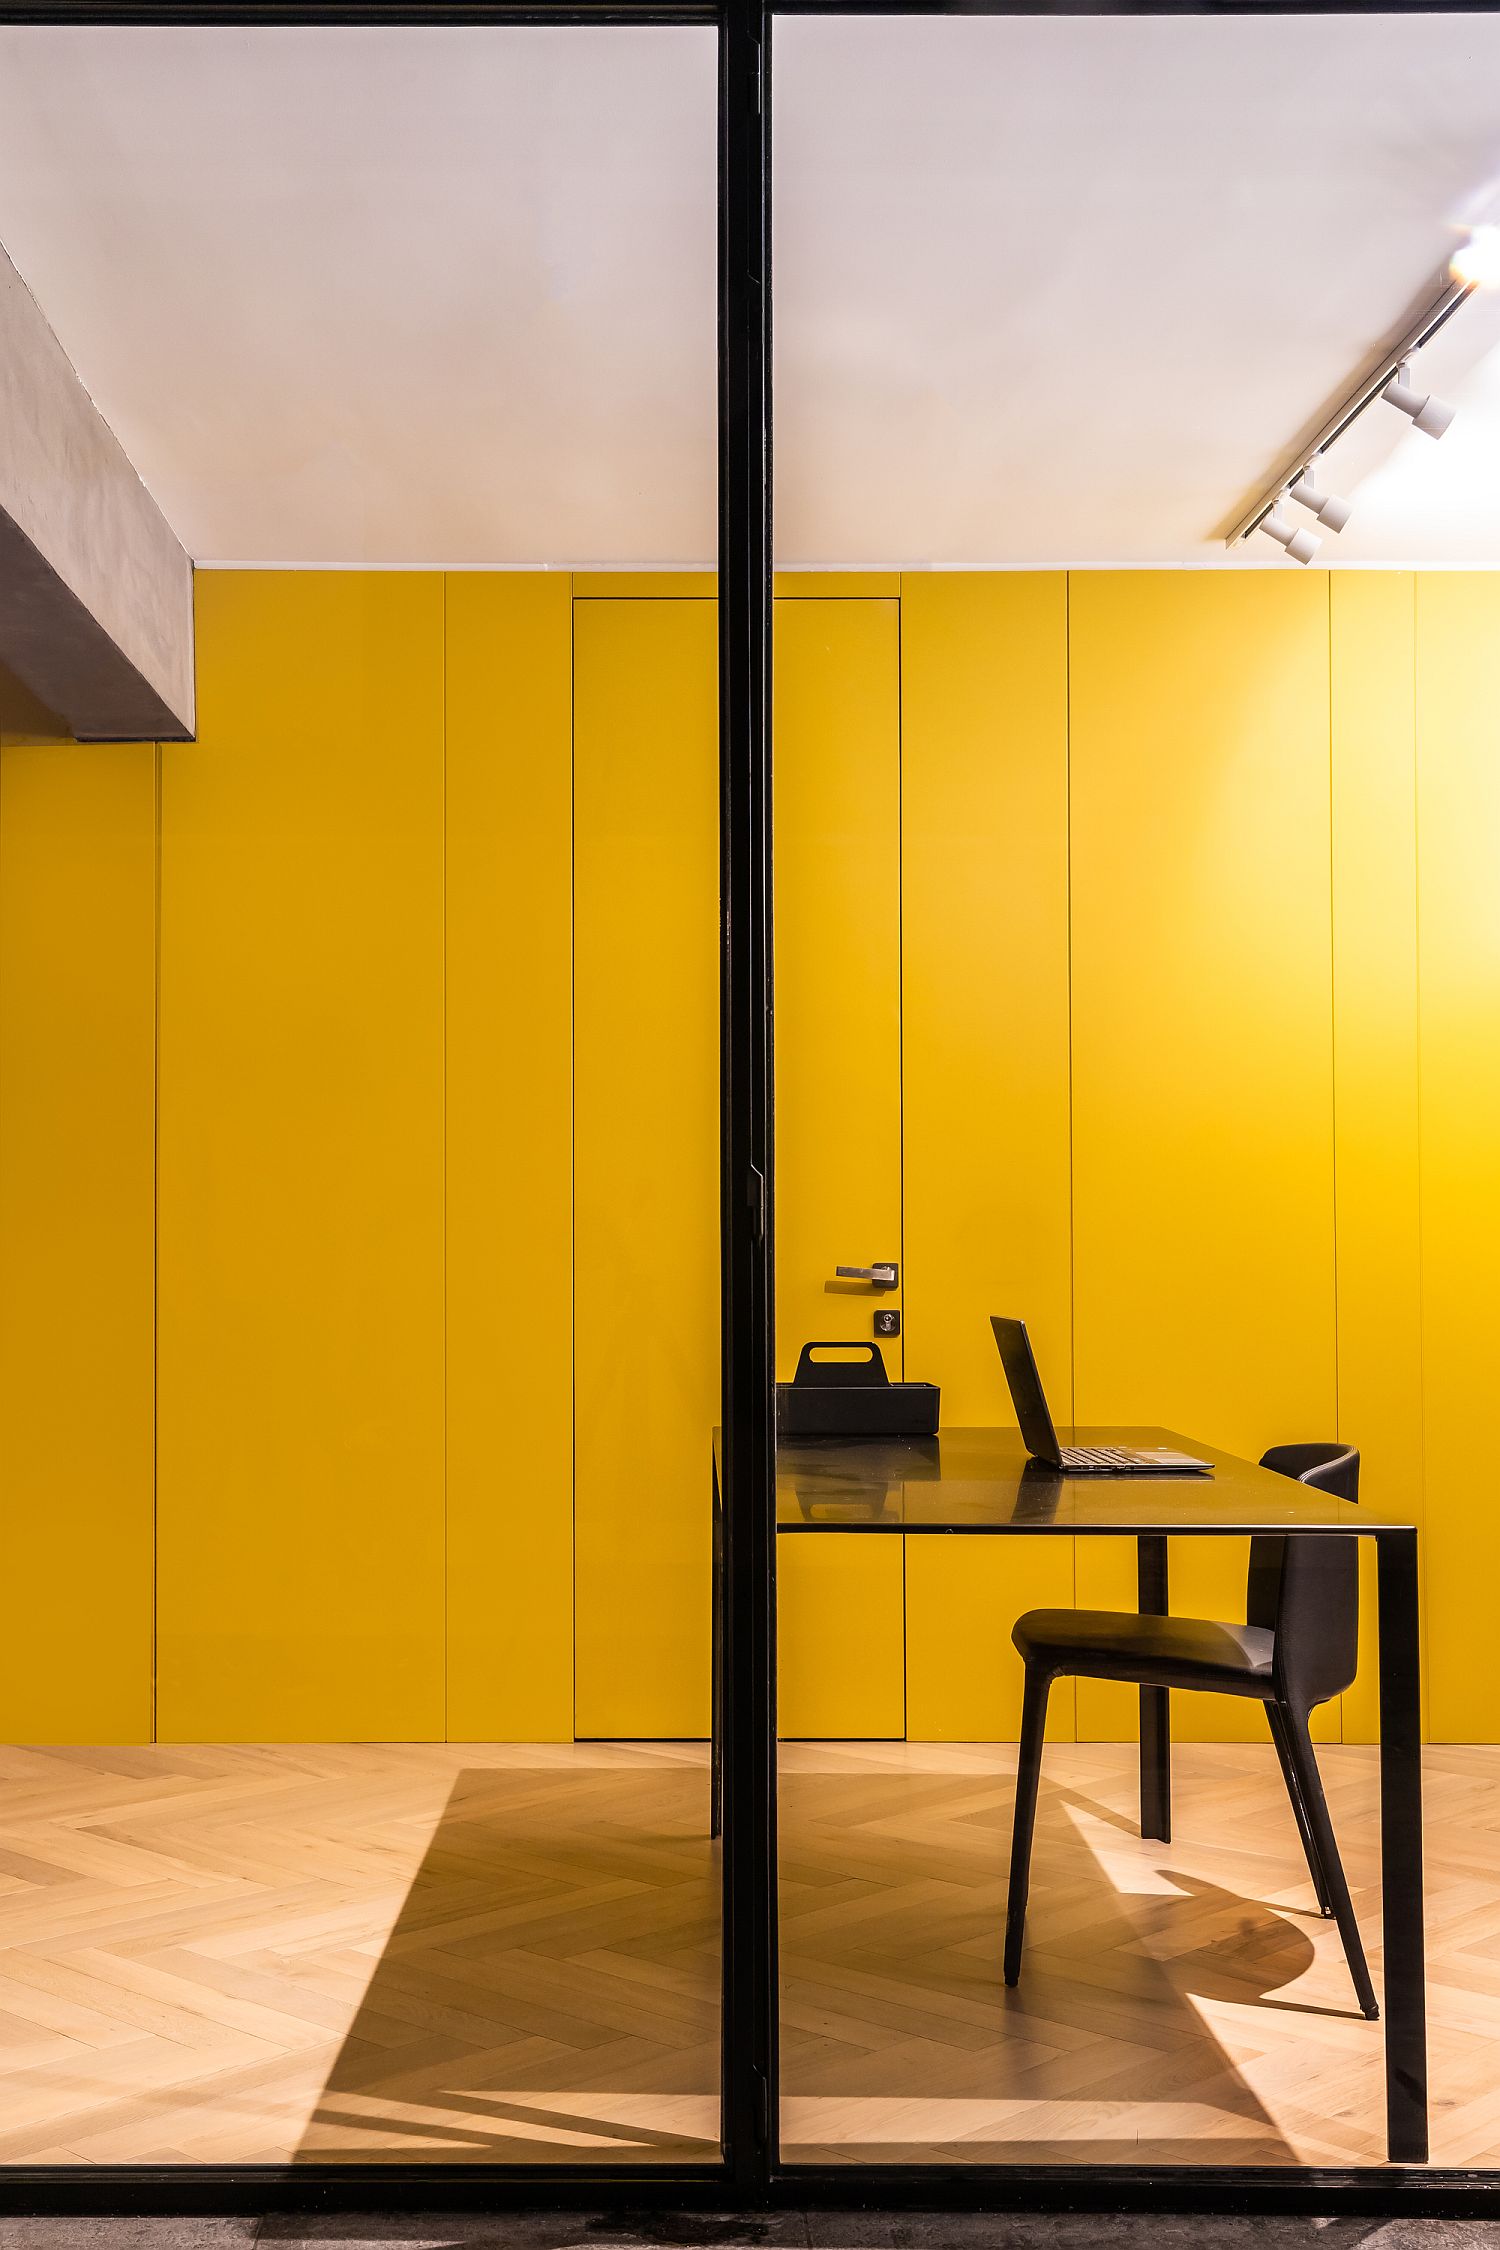 Custom-mustard-yellow-wall-in-wood-hides-bathrooms-and-bedrooms-behnd-it